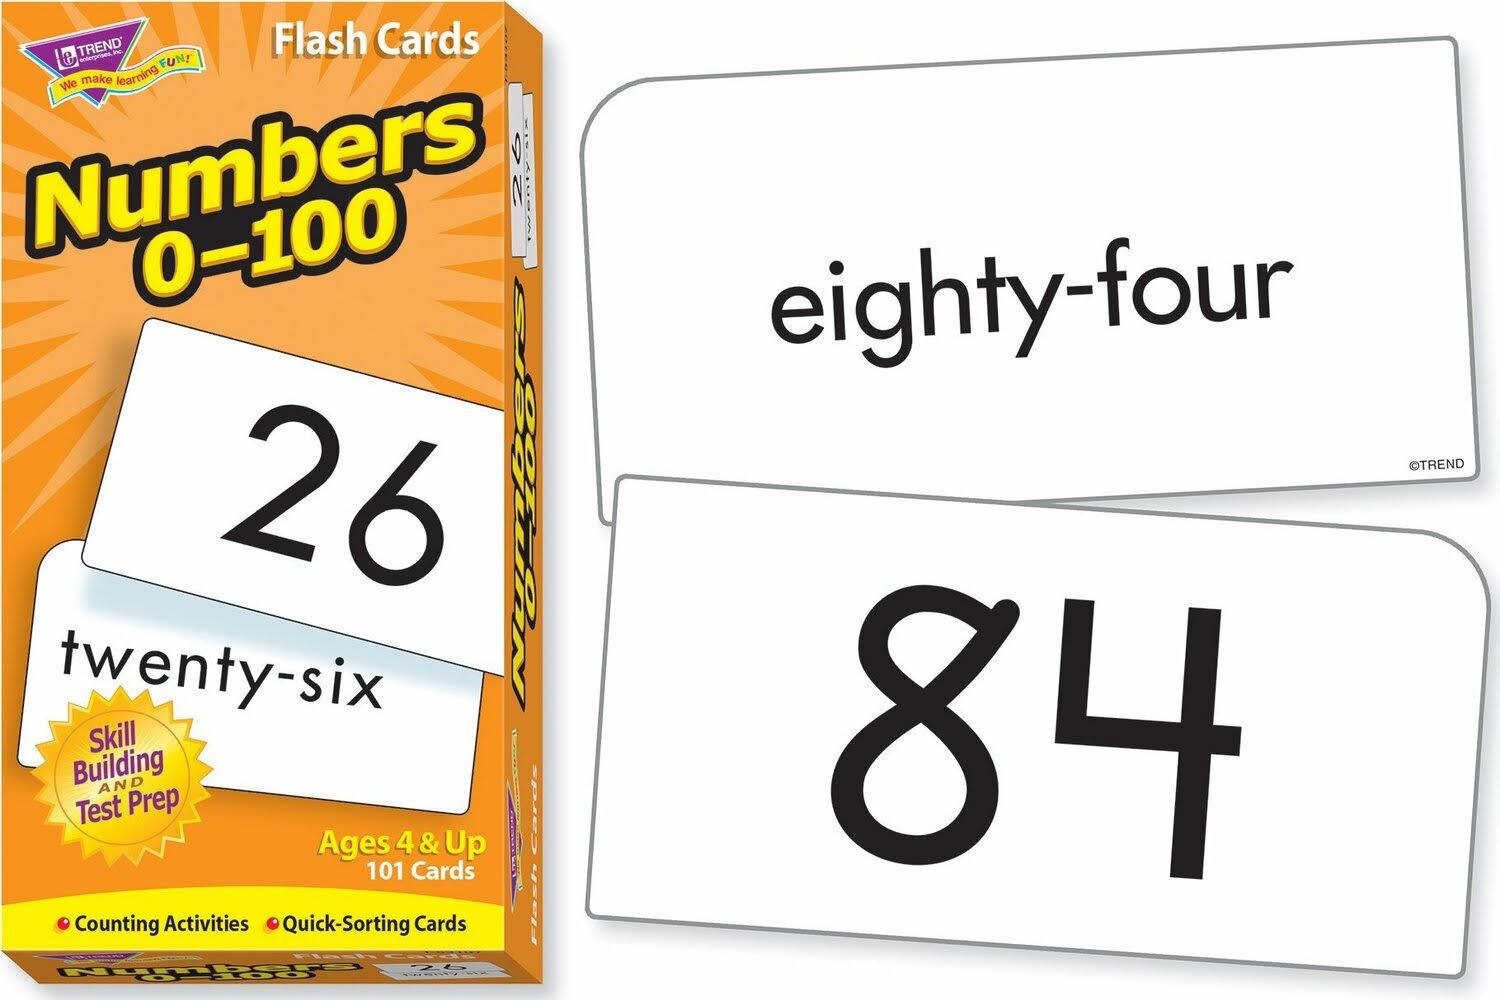 Flash Cards Numbers (0-100) - 101 Cards /Box